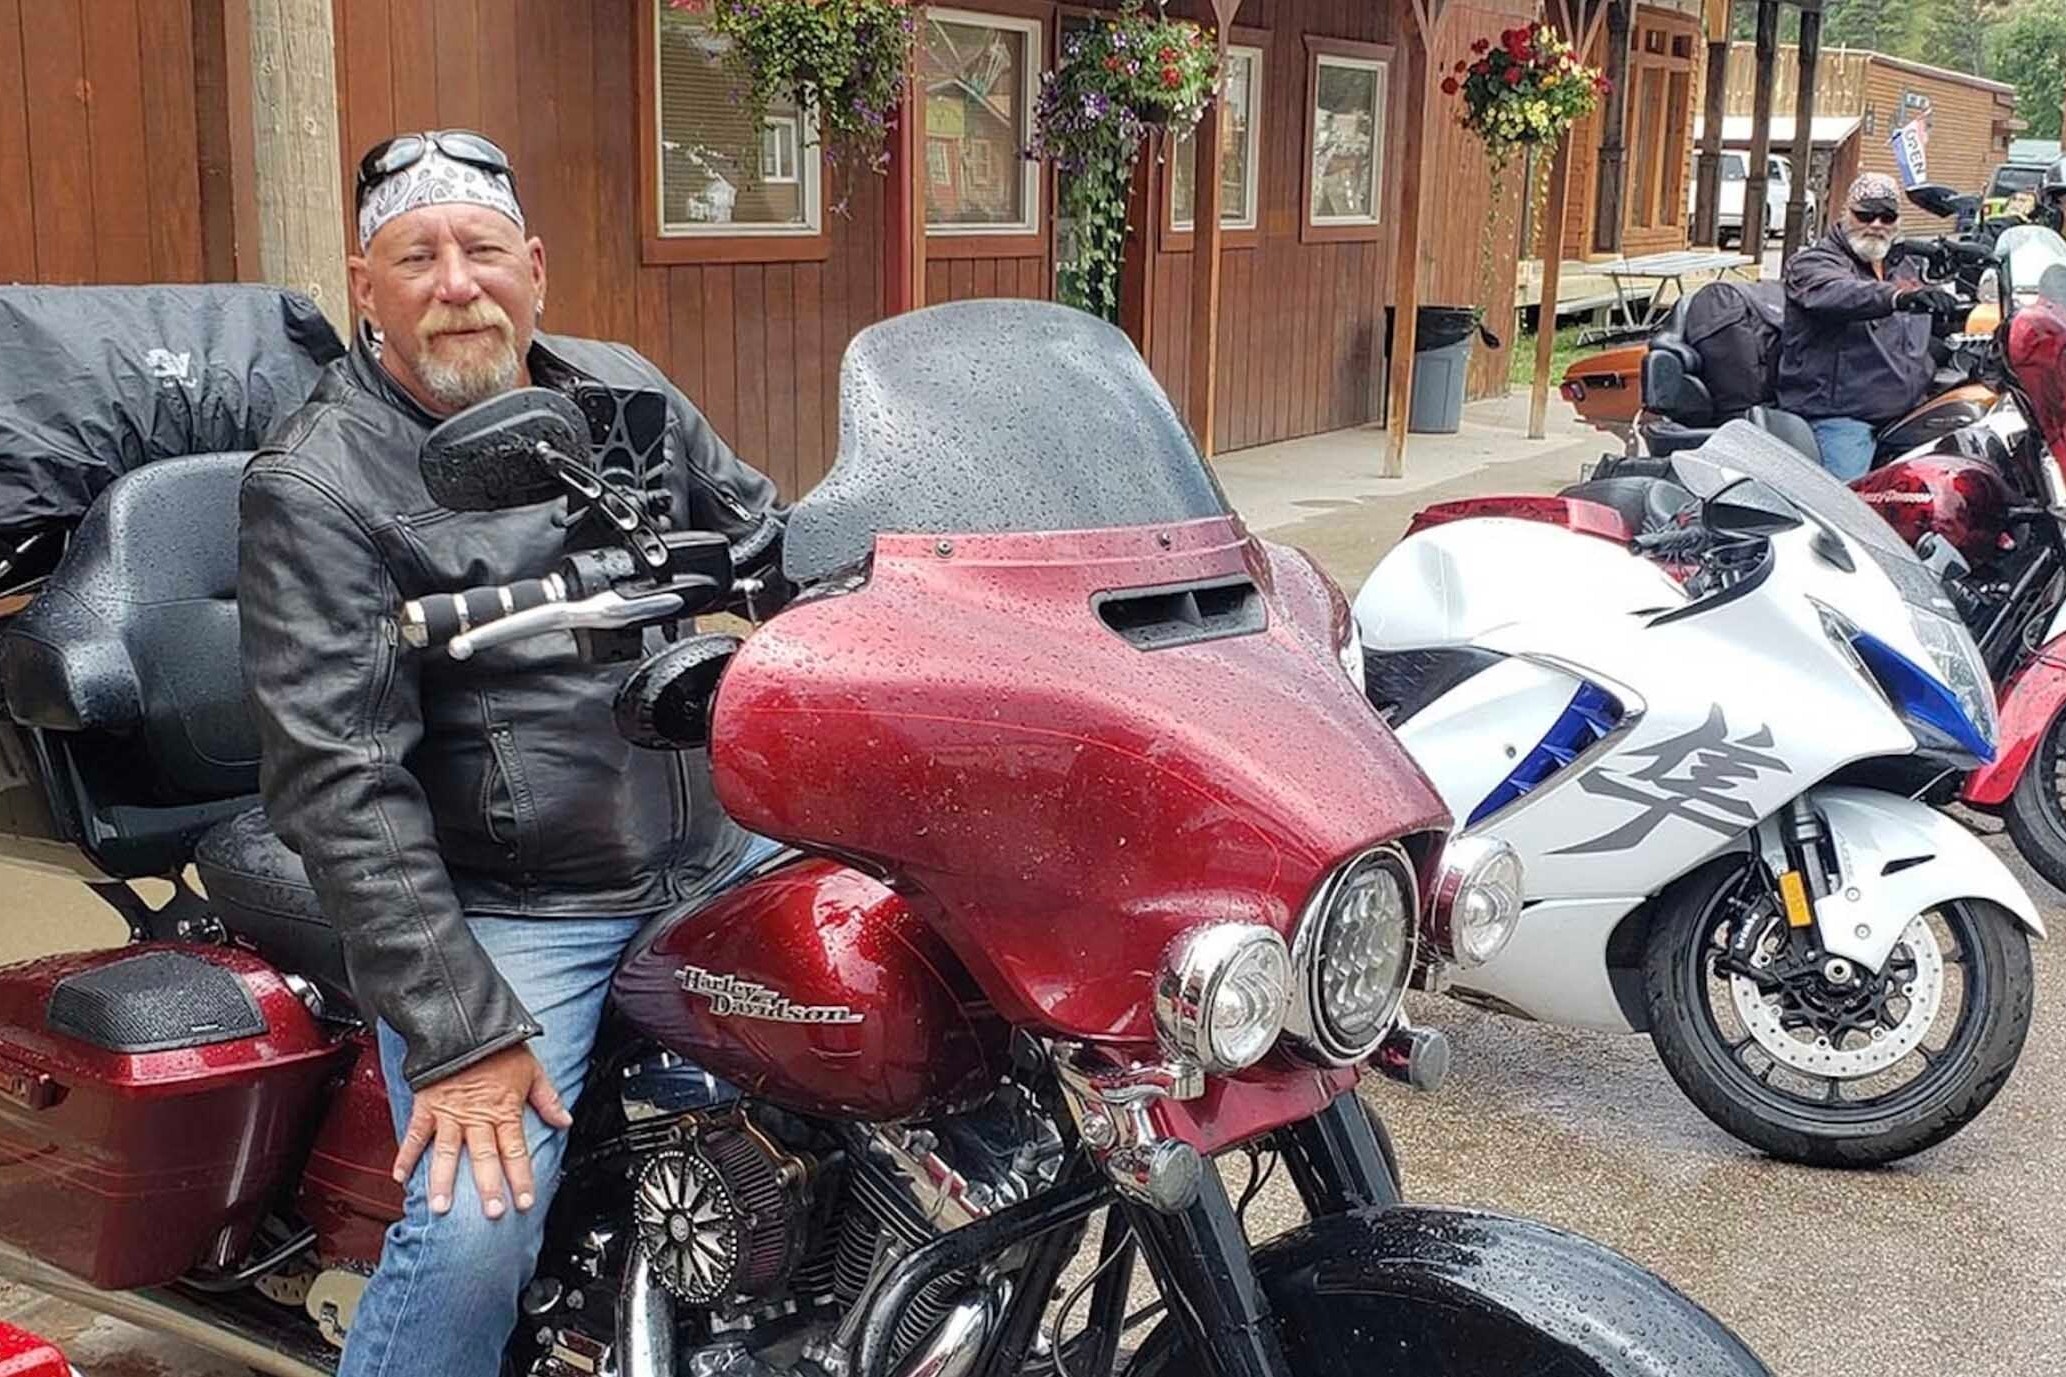 Jeff G started out last week in South Dakota took a trip through Glacier National Park, and now he's headed back to Sturgis with plans to stop in for about one day of the rally before heading back home.